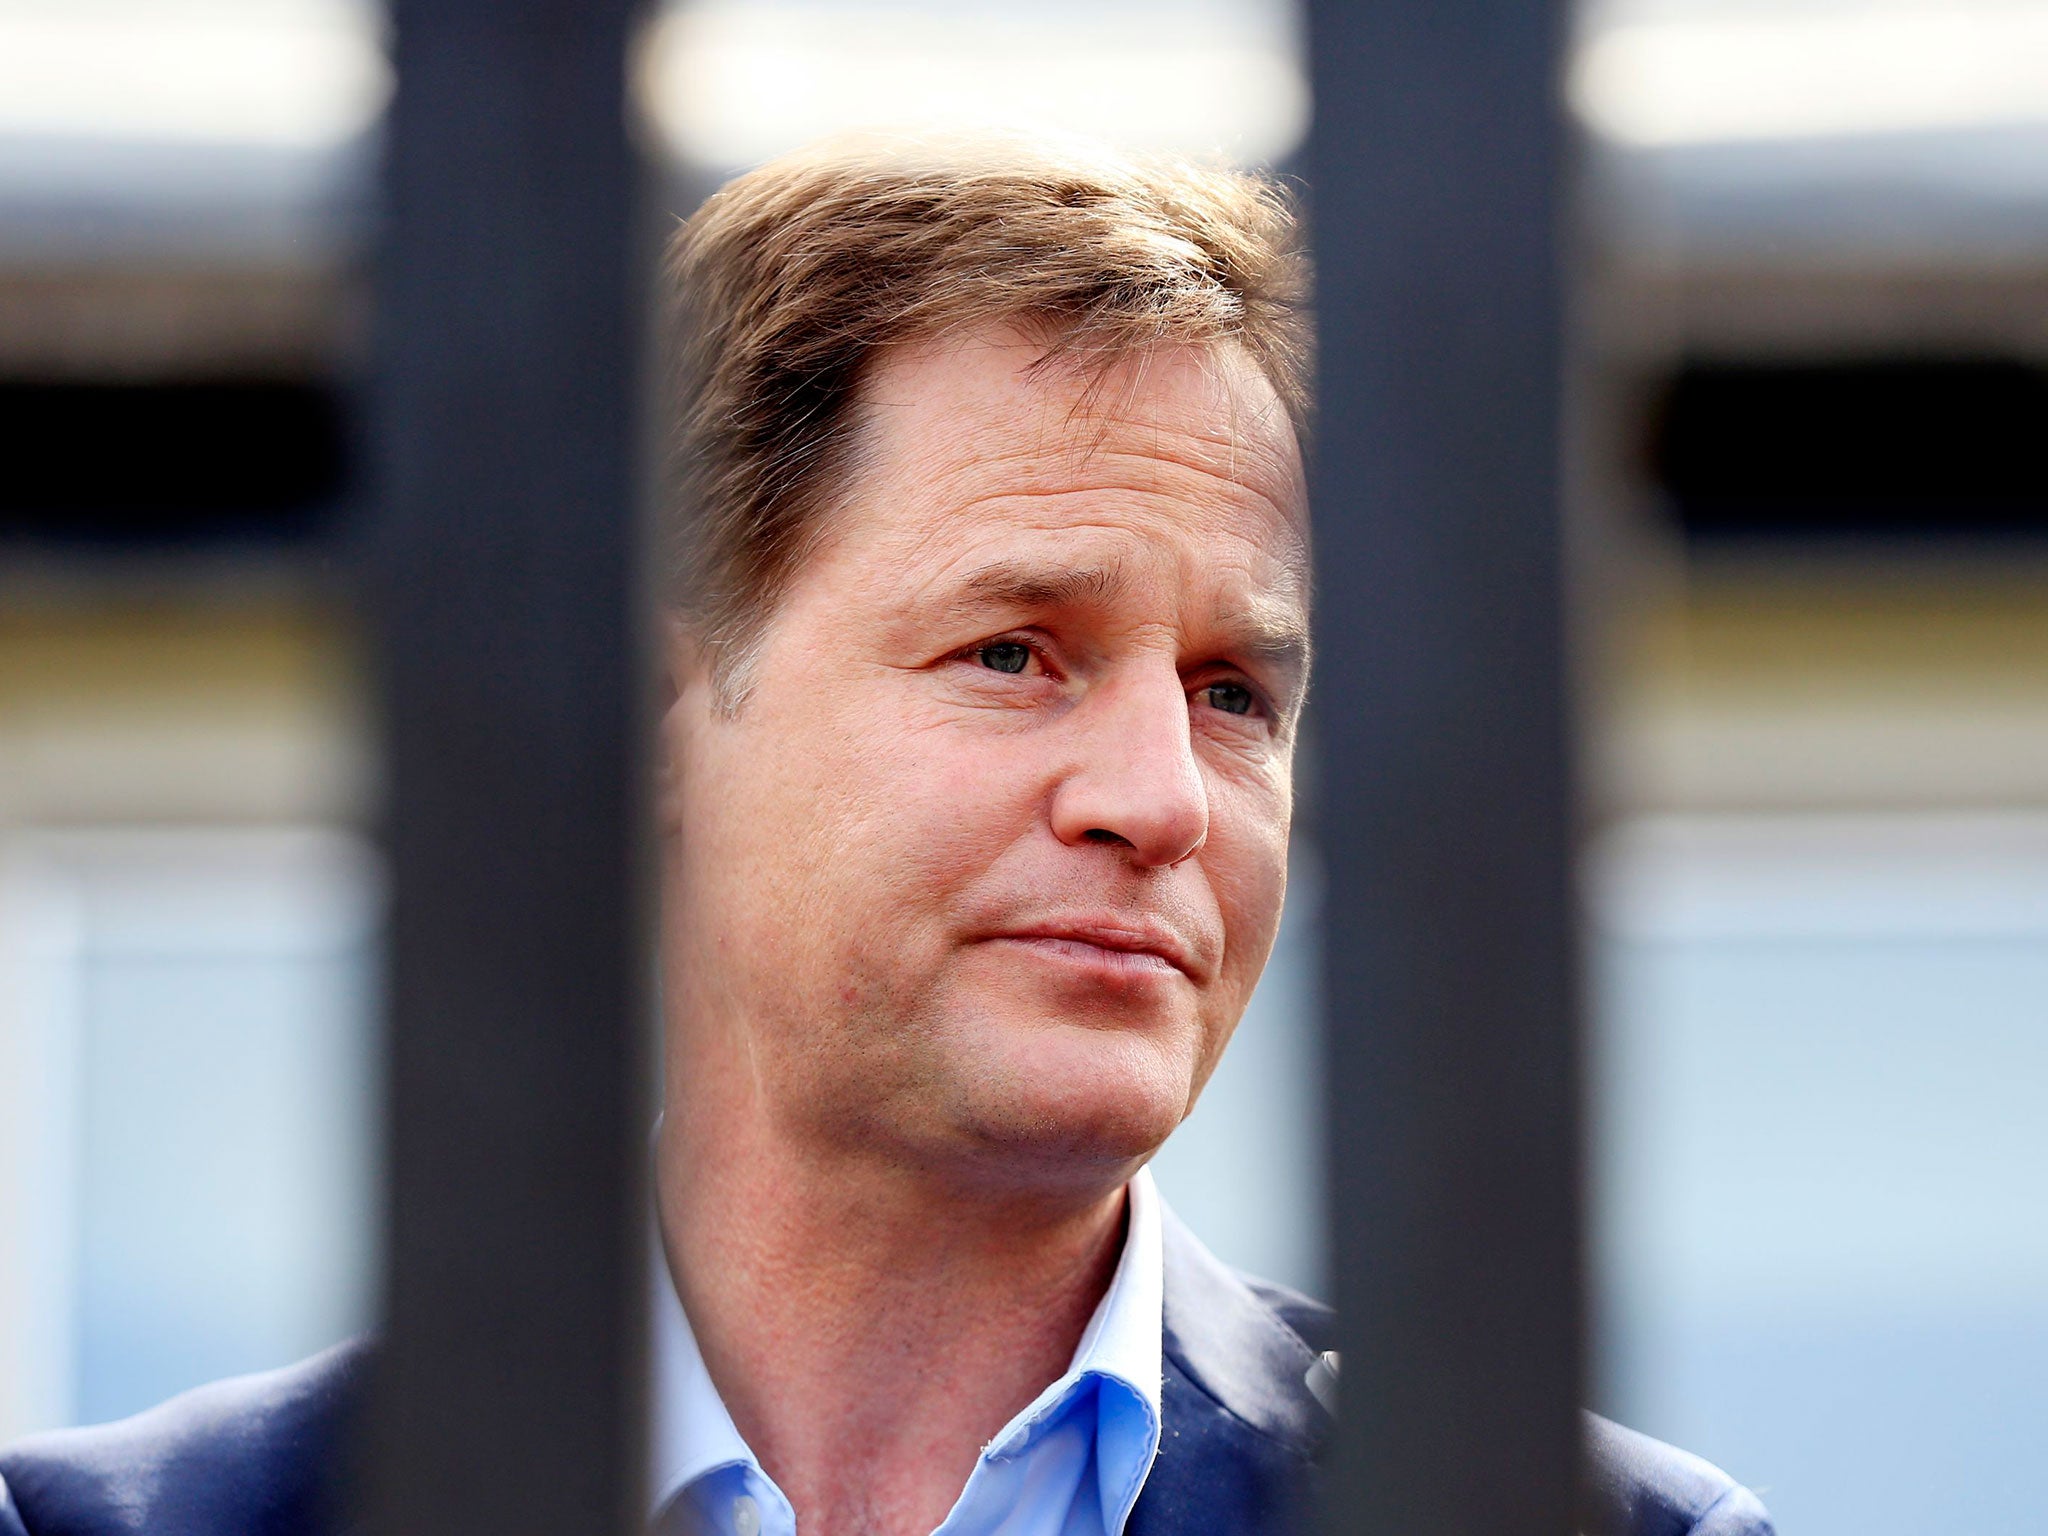 Nick Clegg is among 89 European Union politicians and other senior figures who have been banned from entering Russia